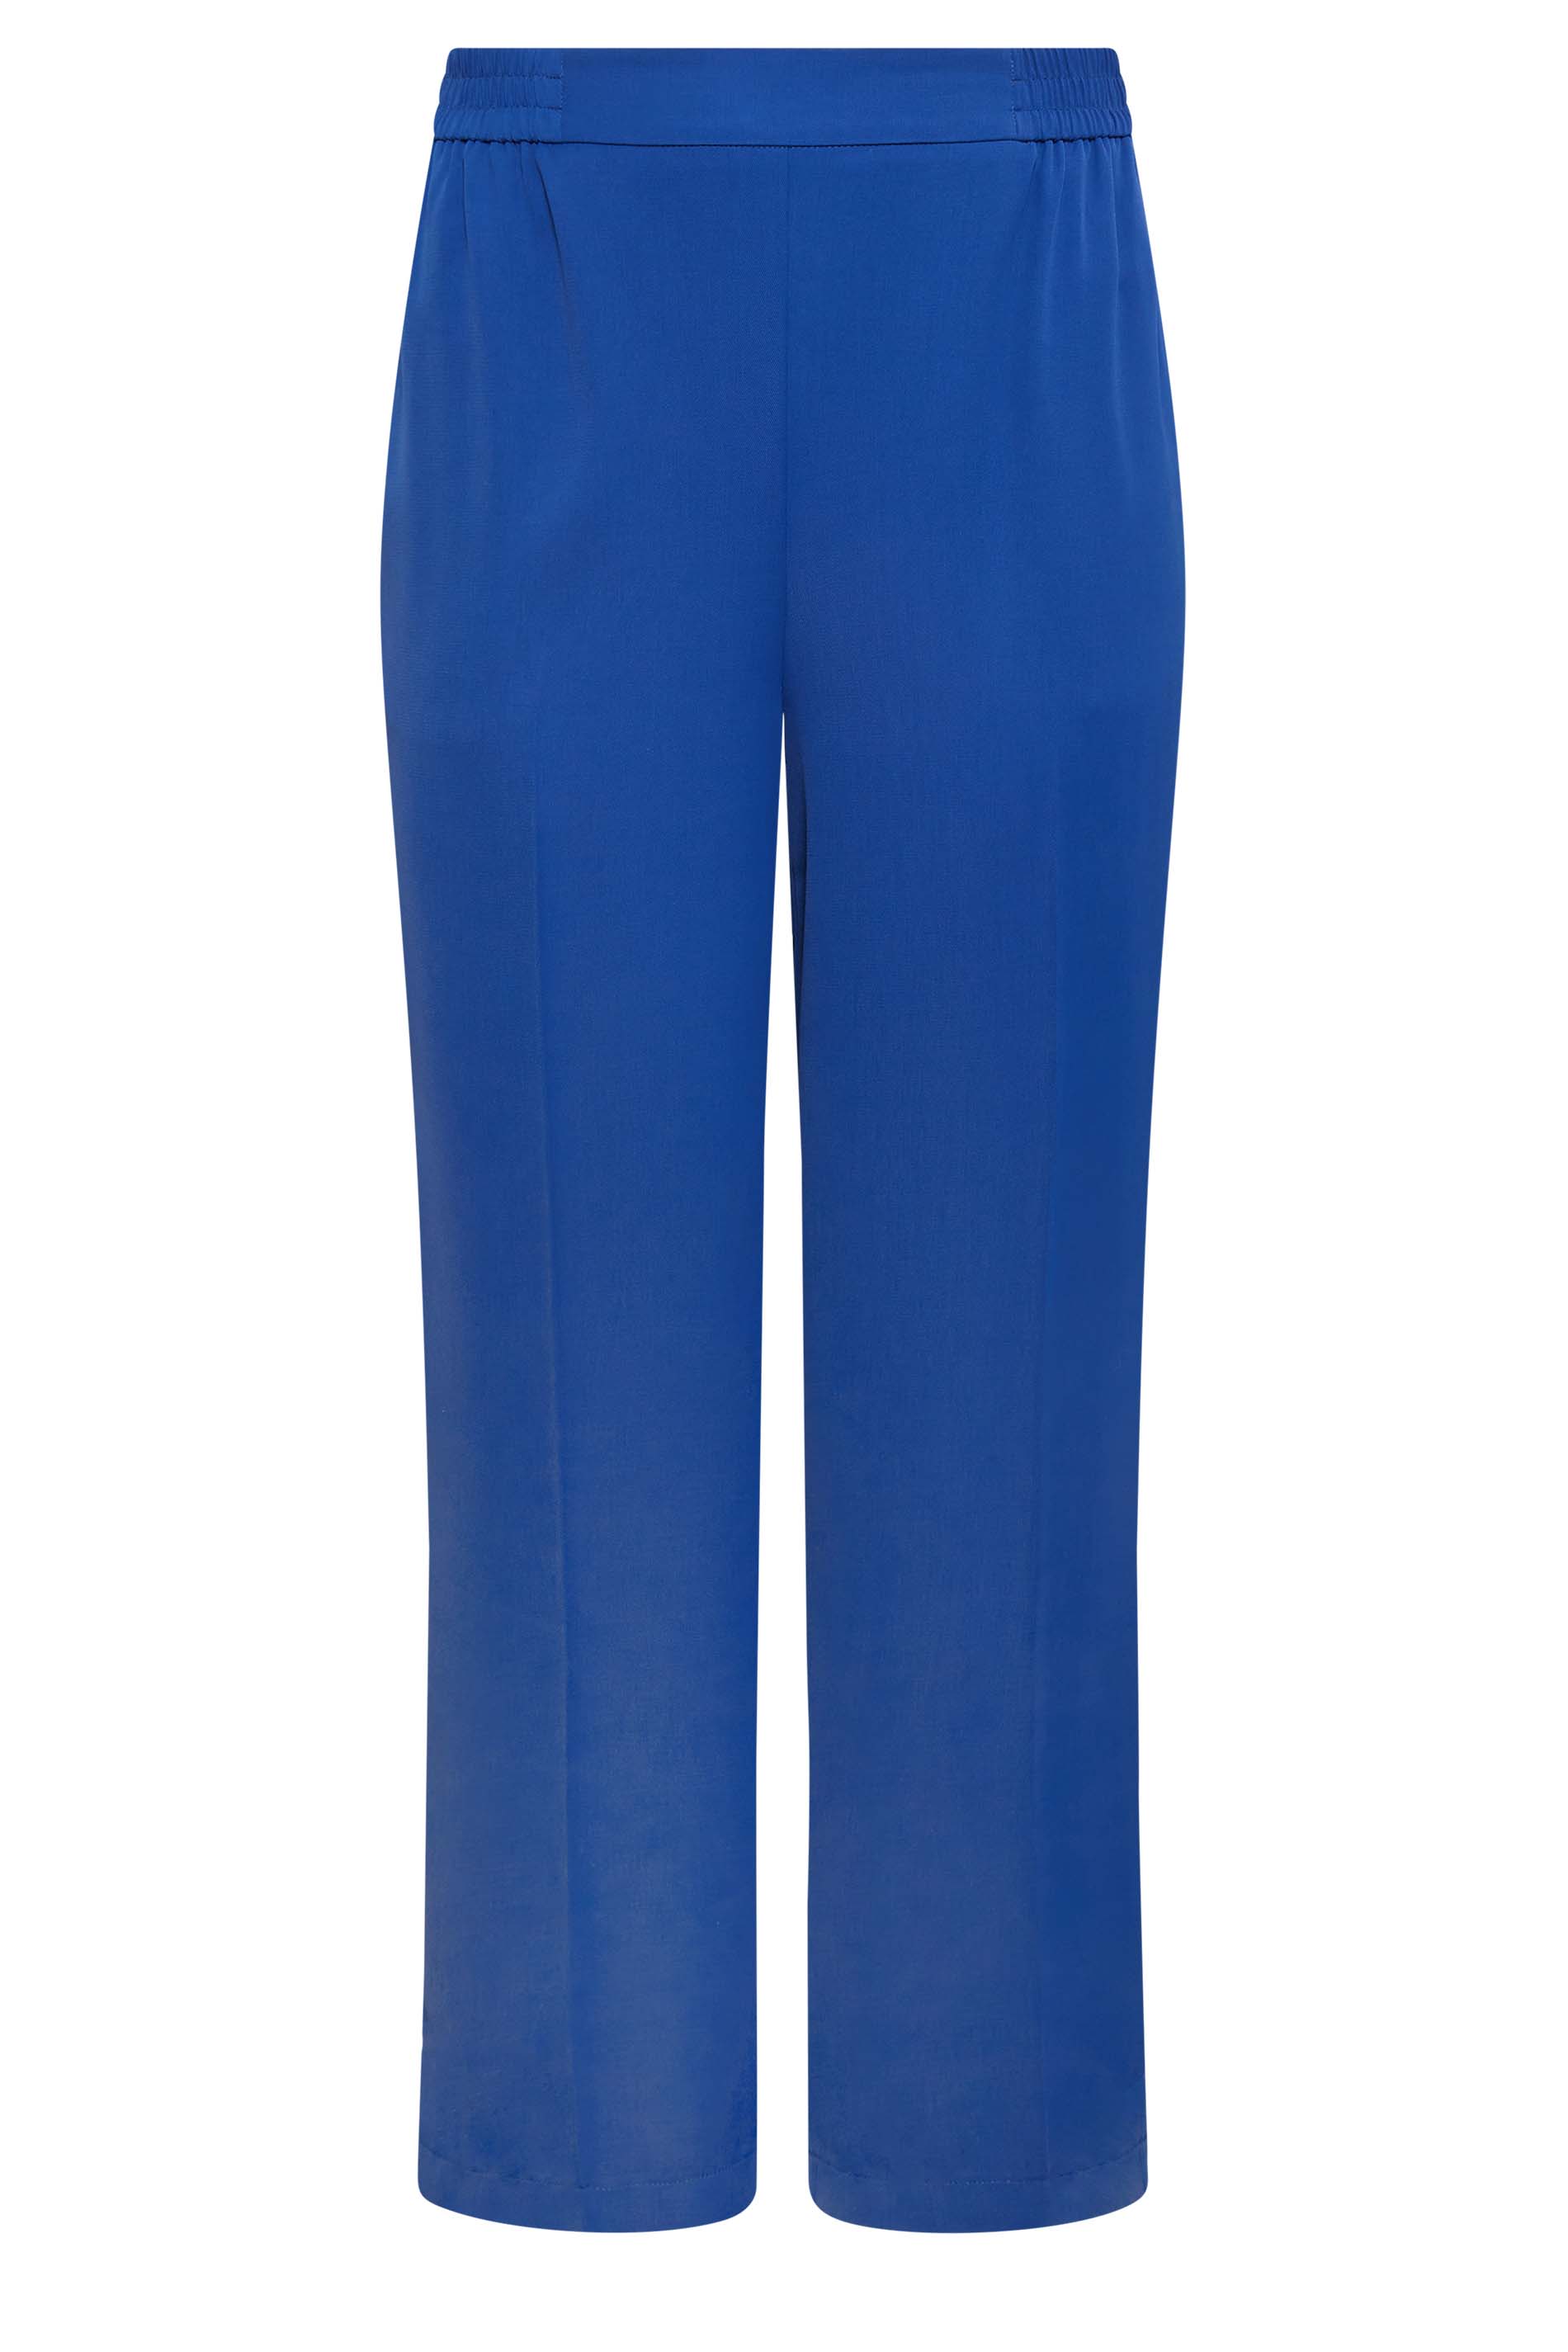 YOURS Plus Size Cobalt Blue Elasticated Waist Pull-On Wide Leg Trousers ...